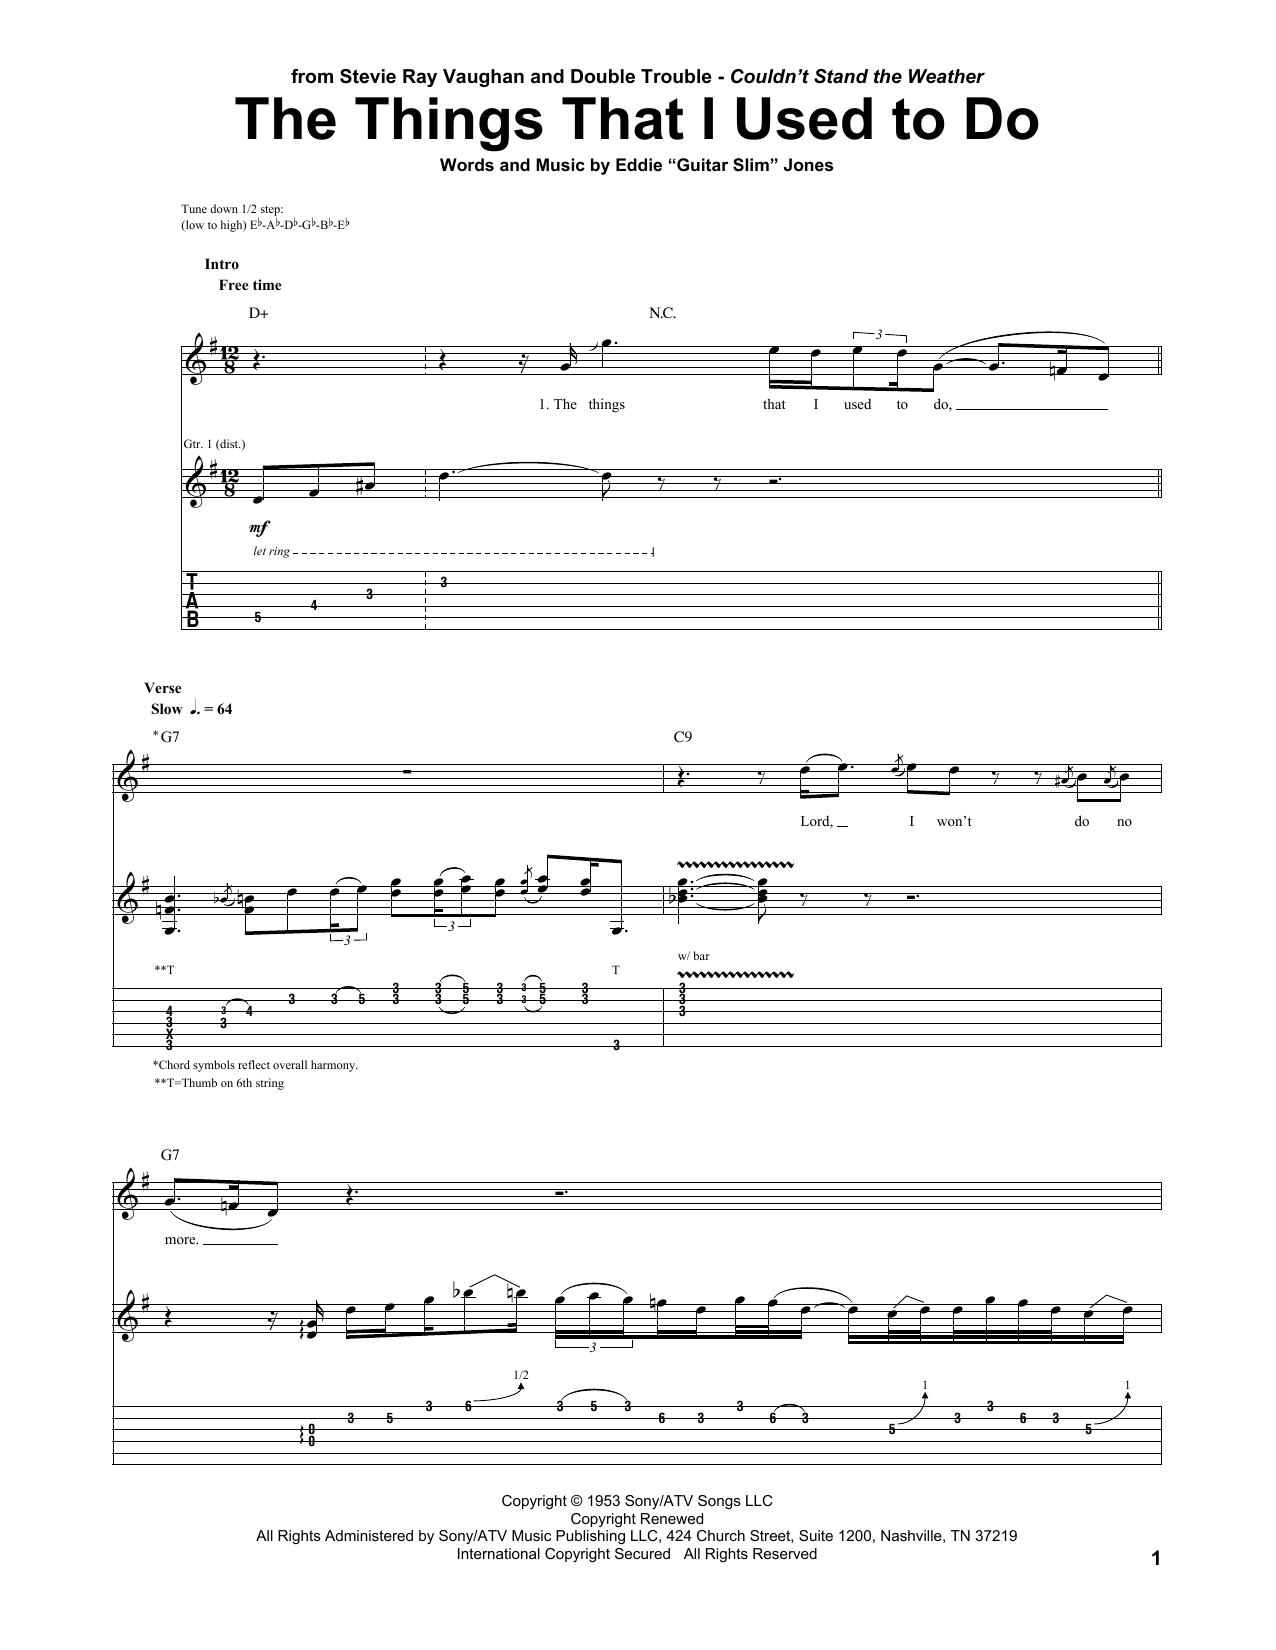 Download Stevie Ray Vaughan The Things That I Used To Do Sheet Music